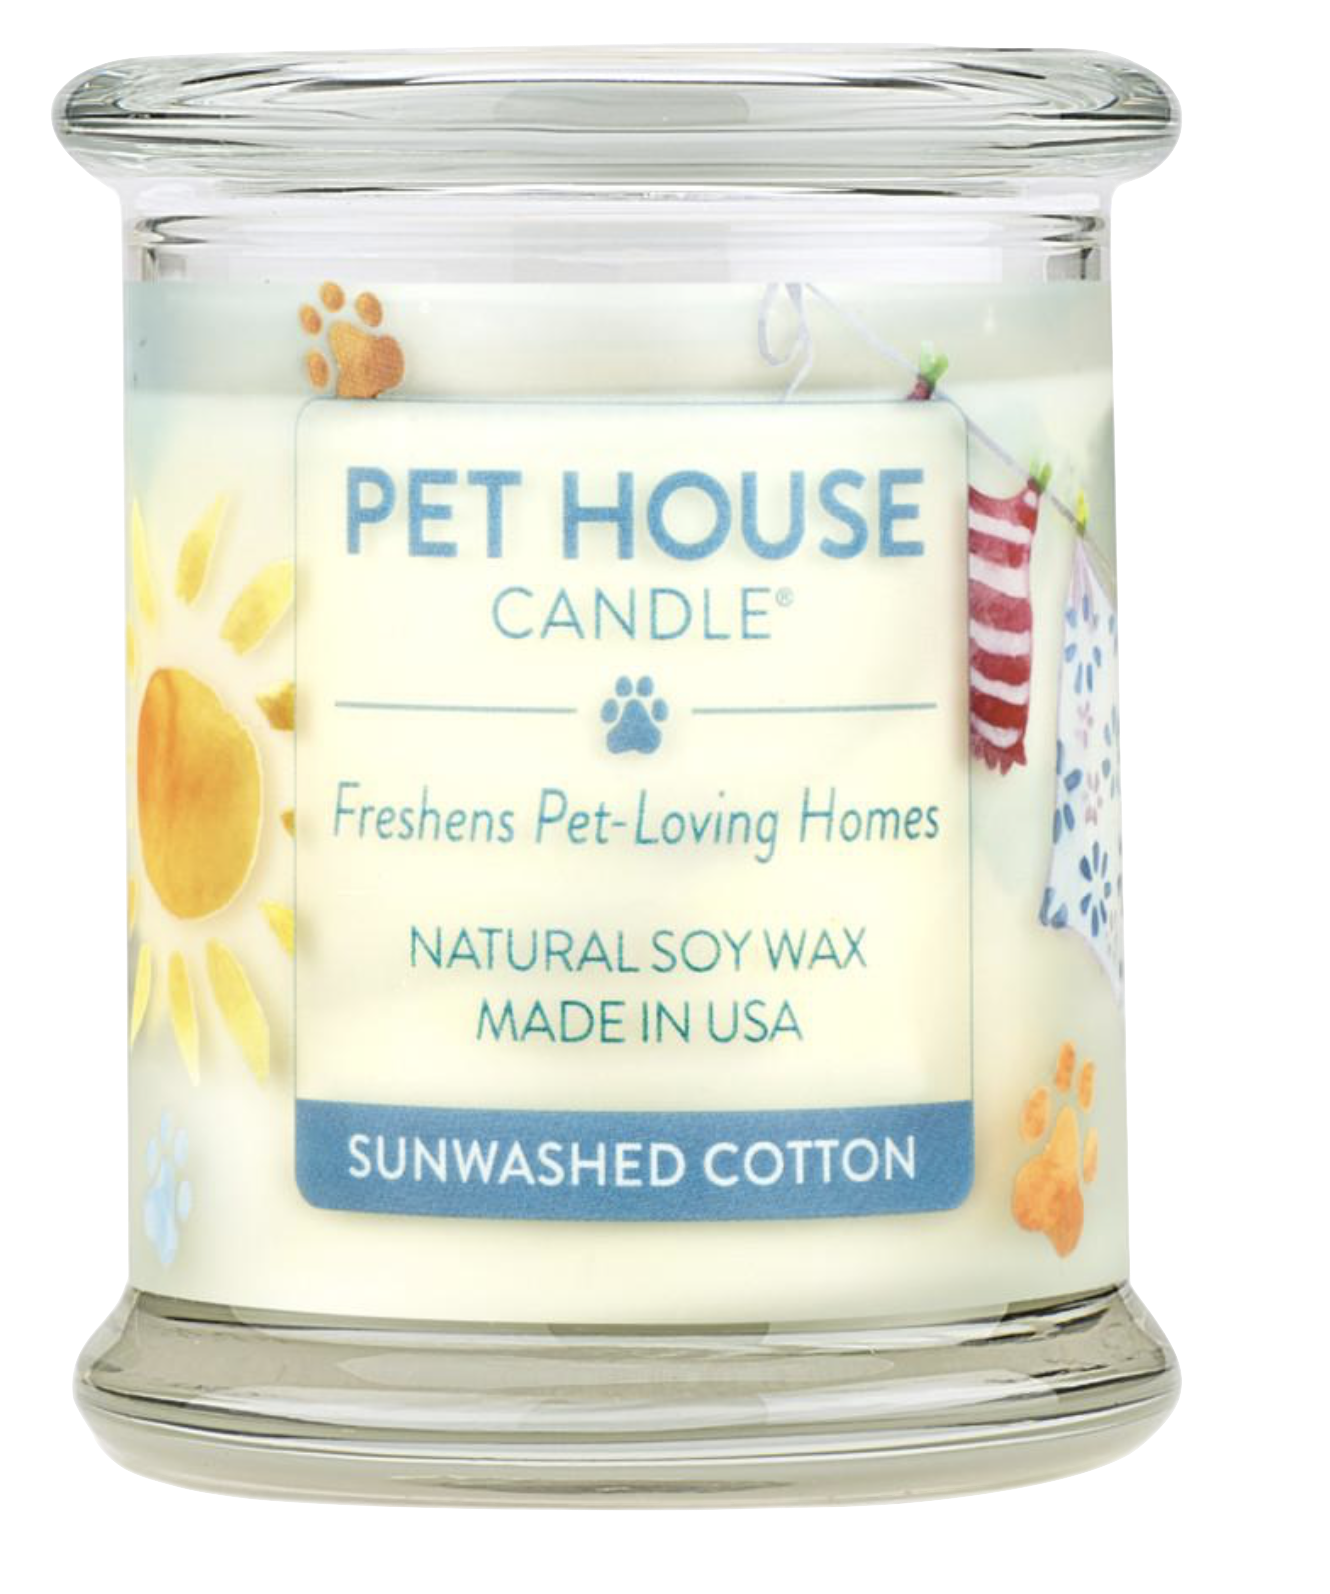 Pet House candles are hand-poured, and made from 100% natural, dye-free soy wax. Comes in an 8.5 oz. glass jar. Fragrance profile is a classic, crisp, and clean laundry fragrance combined with fruity accents.